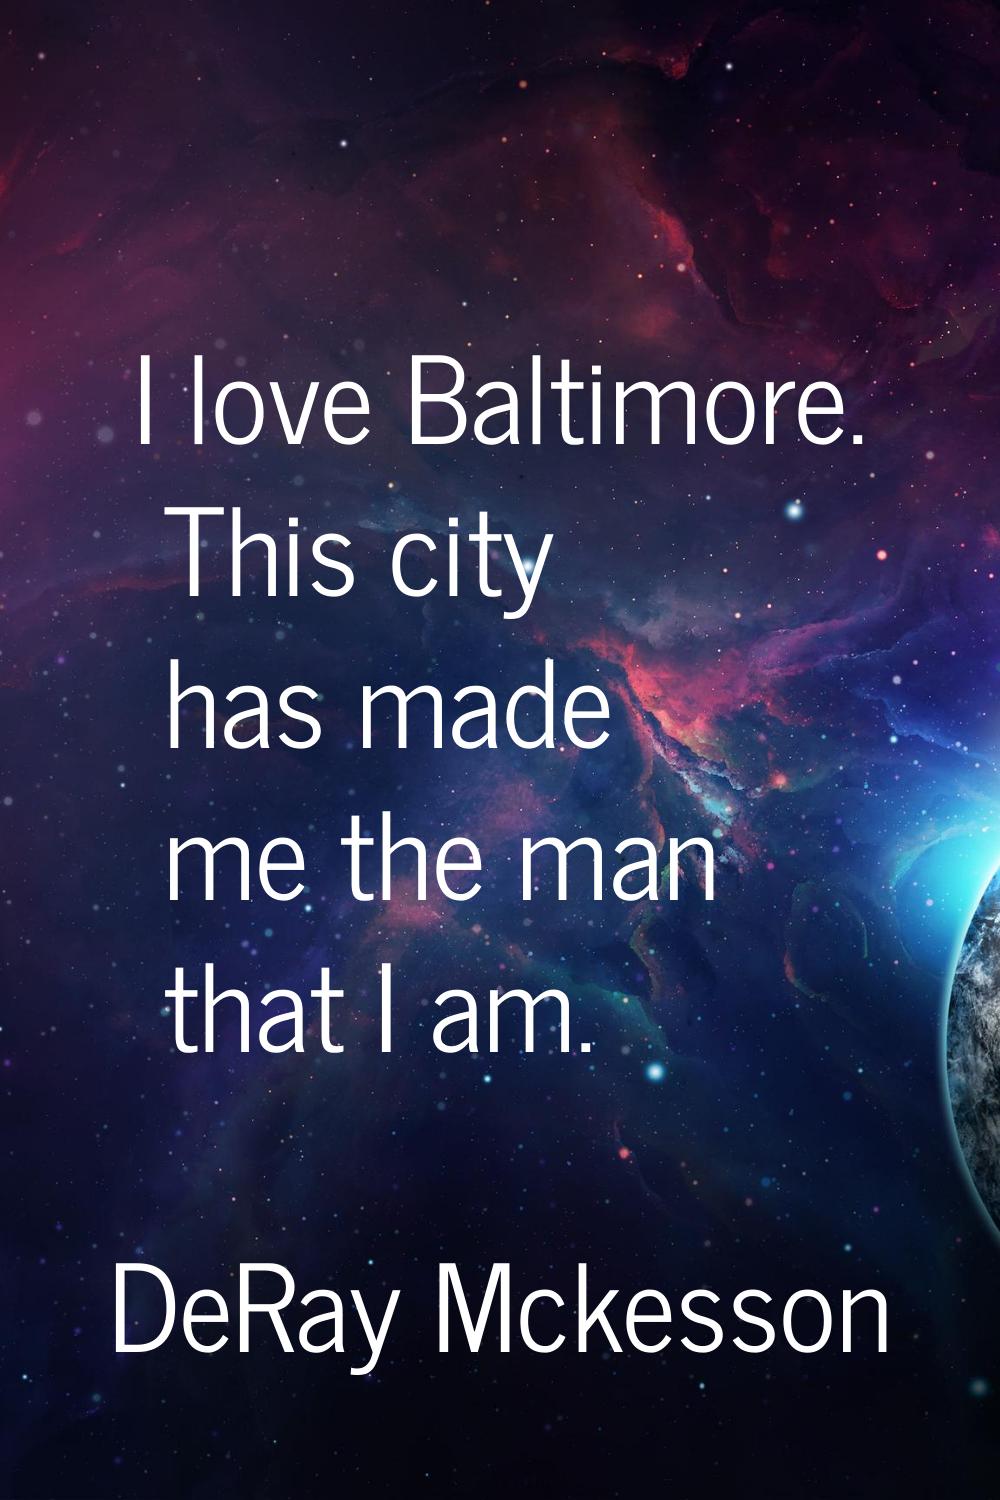 I love Baltimore. This city has made me the man that I am.